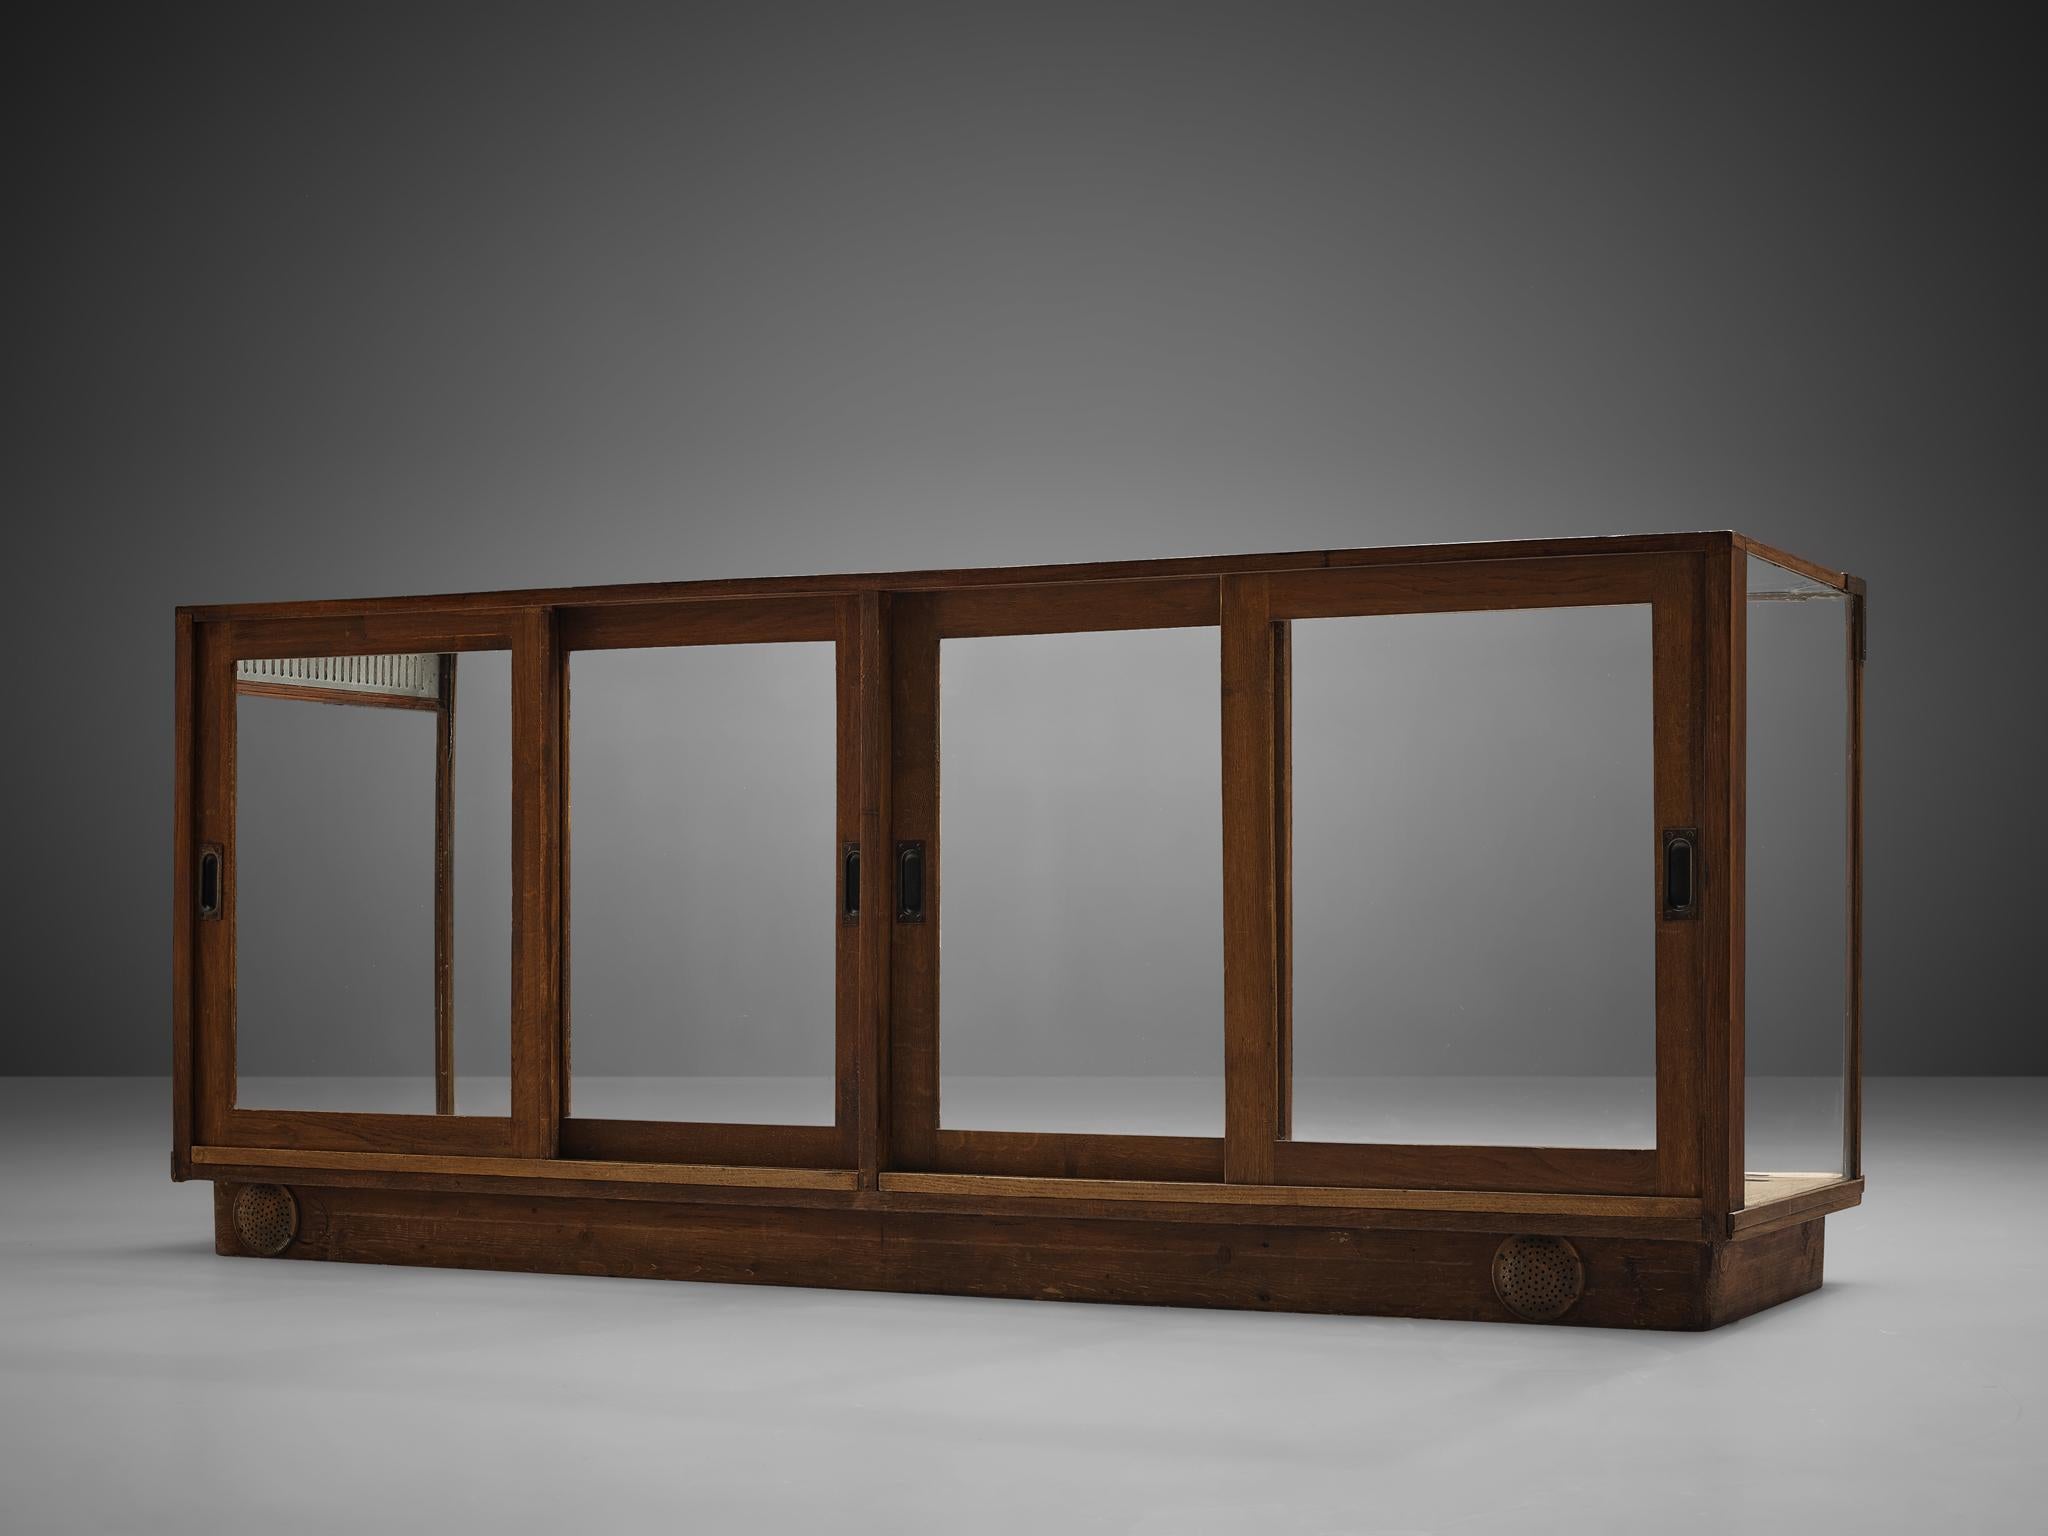 Showcase, oak, glass and metal, Europe, 1940s.

This large showcase is made in dark stained oak, with sliding glass doors and a glass top and sides. The transparency allows the user to display its personal belongings of high value such as glassware